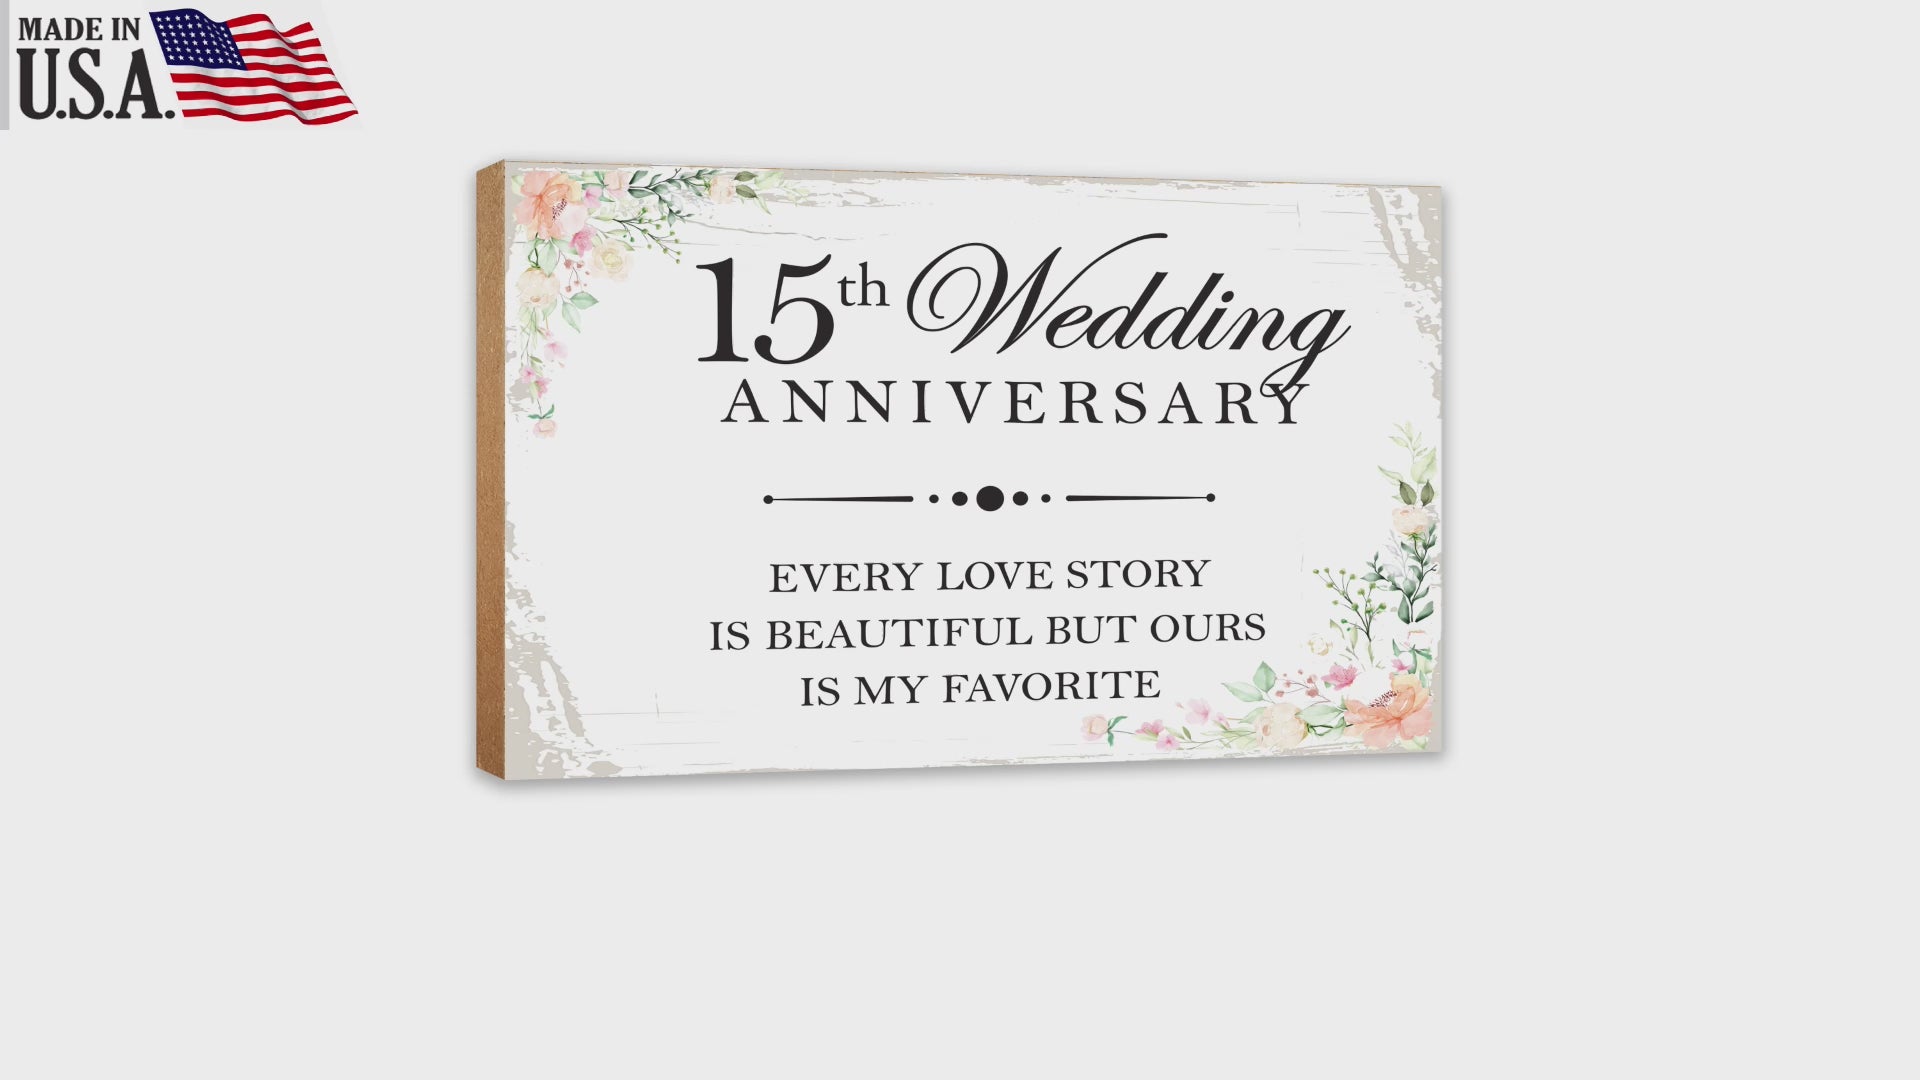 15th Wedding Anniversary Unique Shelf Decor and Tabletop Signs Gift for Couples - Every Love Story